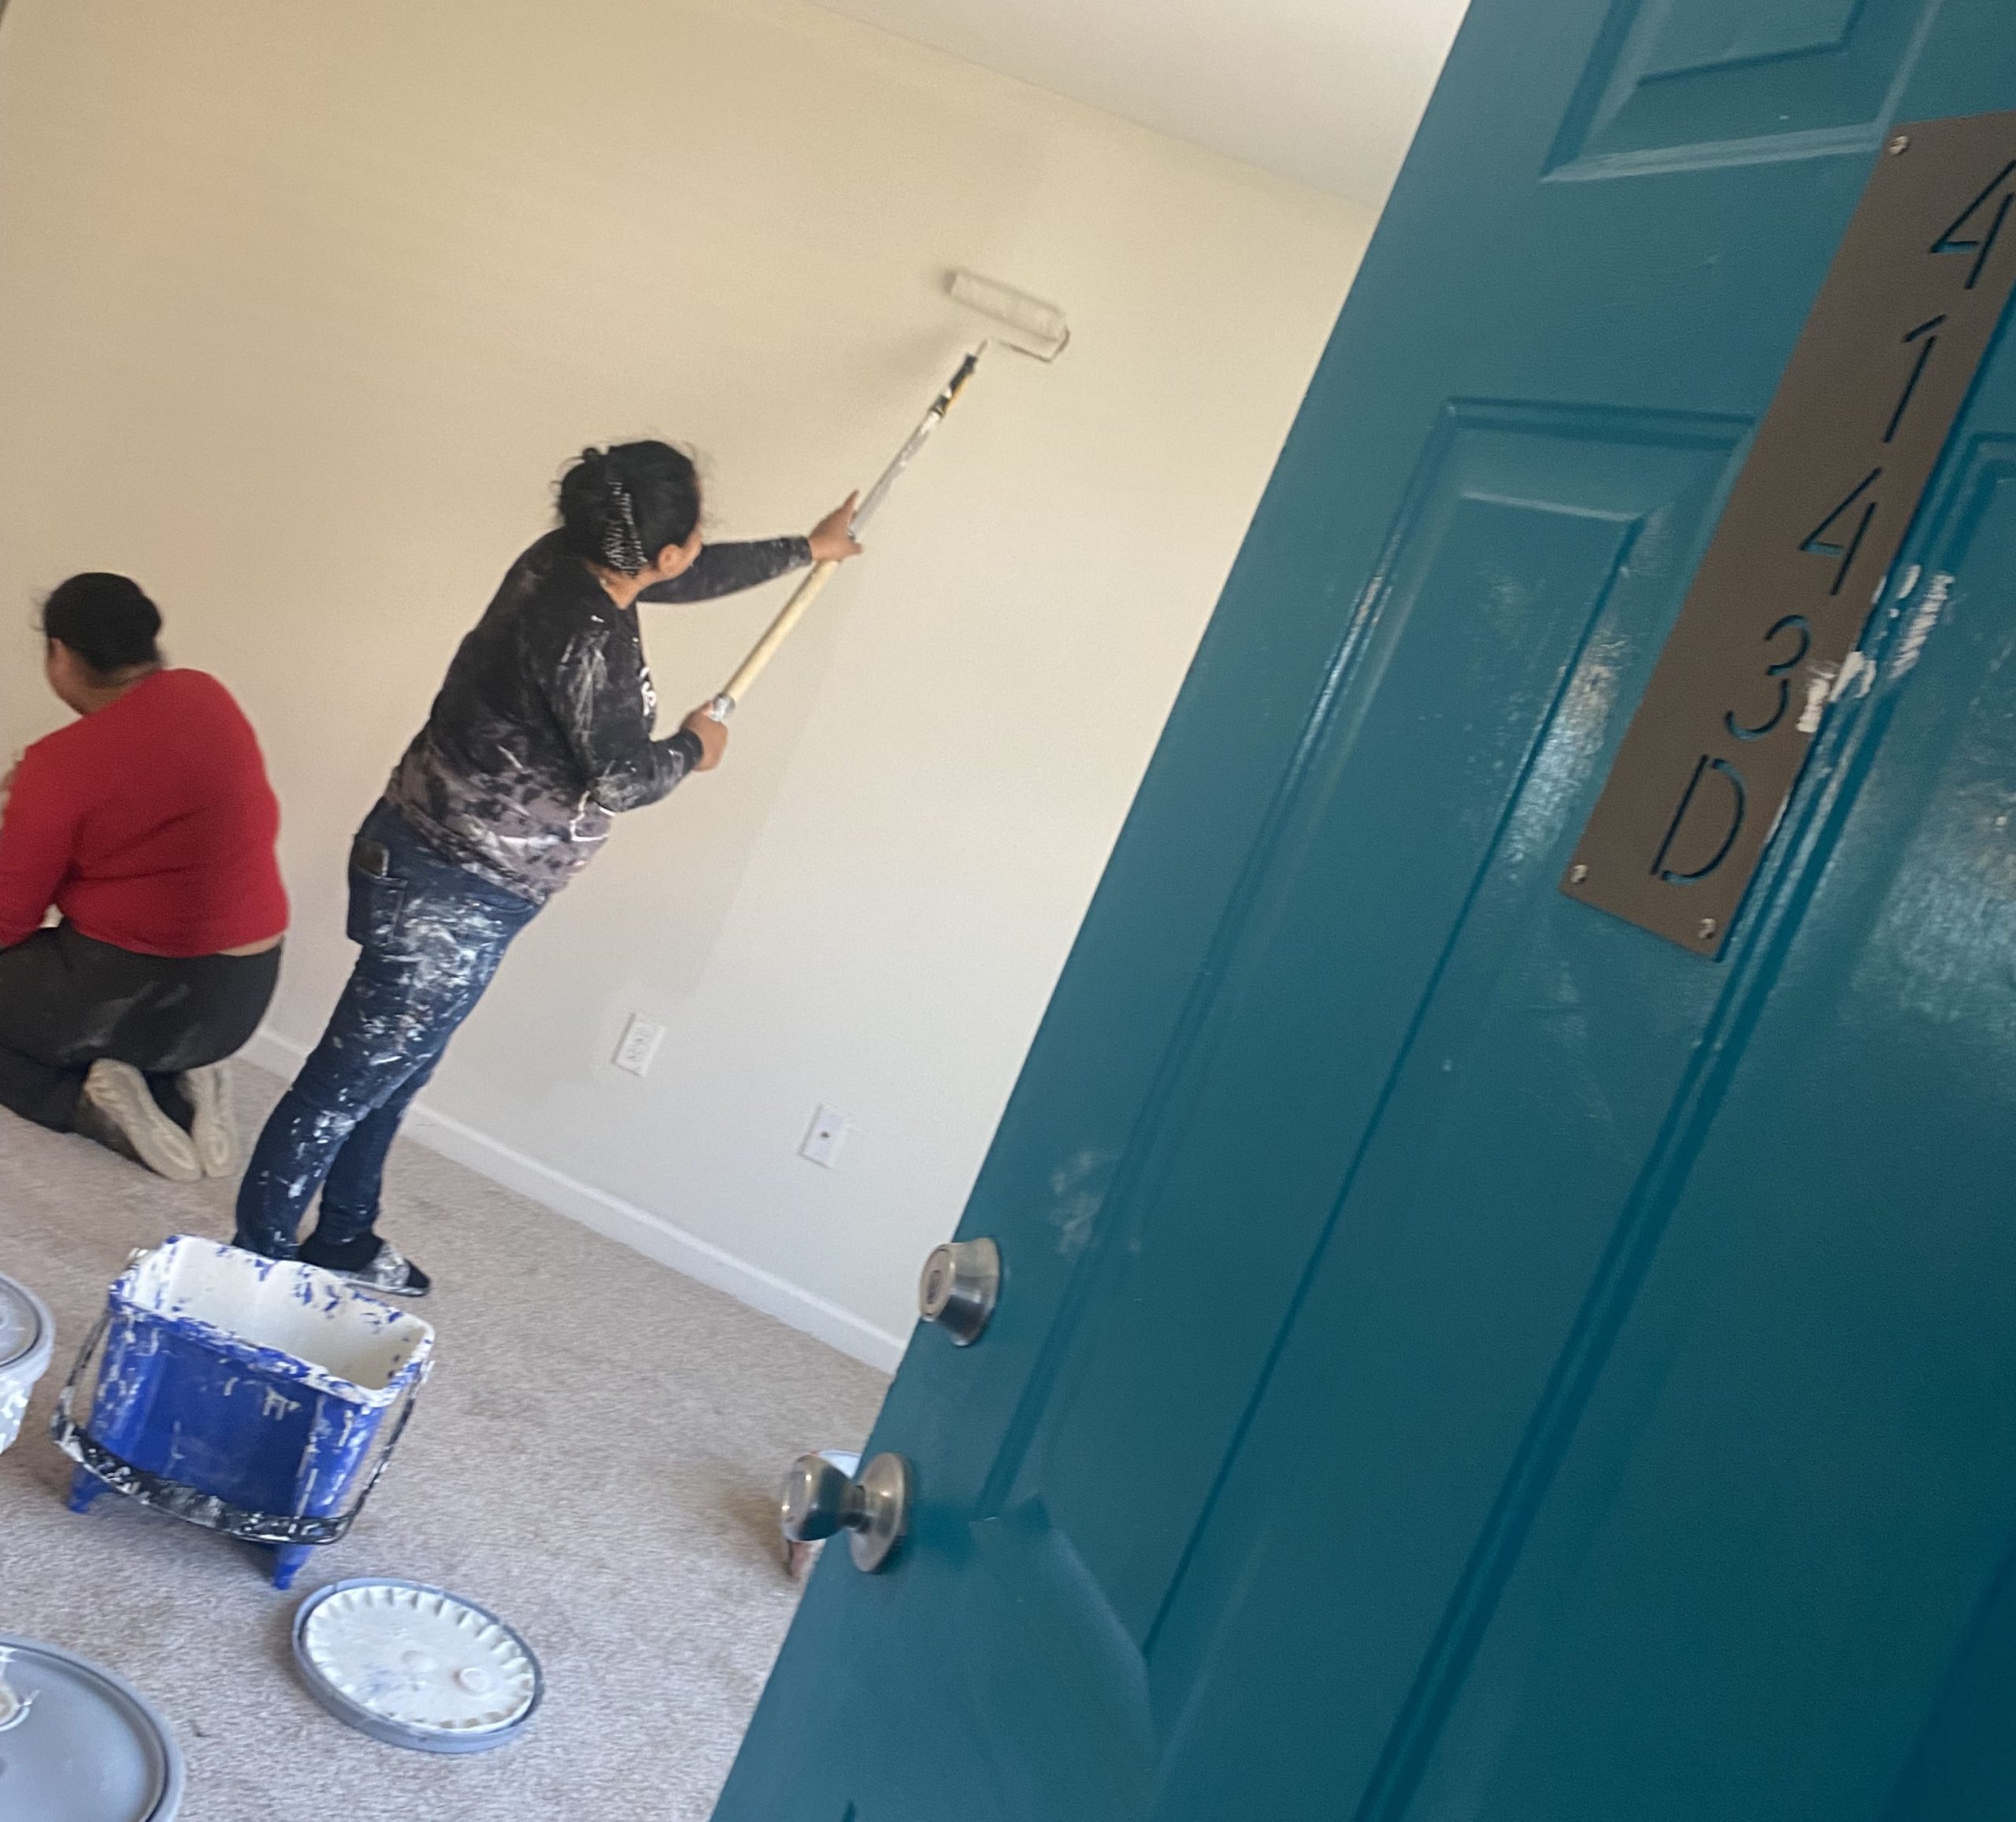 Disaster restoration worker Jenny, dressed in a black shirt and jeans, and her sister Abigail, dressed in an orange shirt and black pants, can be seen through a teal doorway, painting a vacant apartment at the Mayfair Apartment Homes in New Orleans with rollers and brushes, facing away from the camera. The right side of Jenny’s body is covered in splotches of white paint.